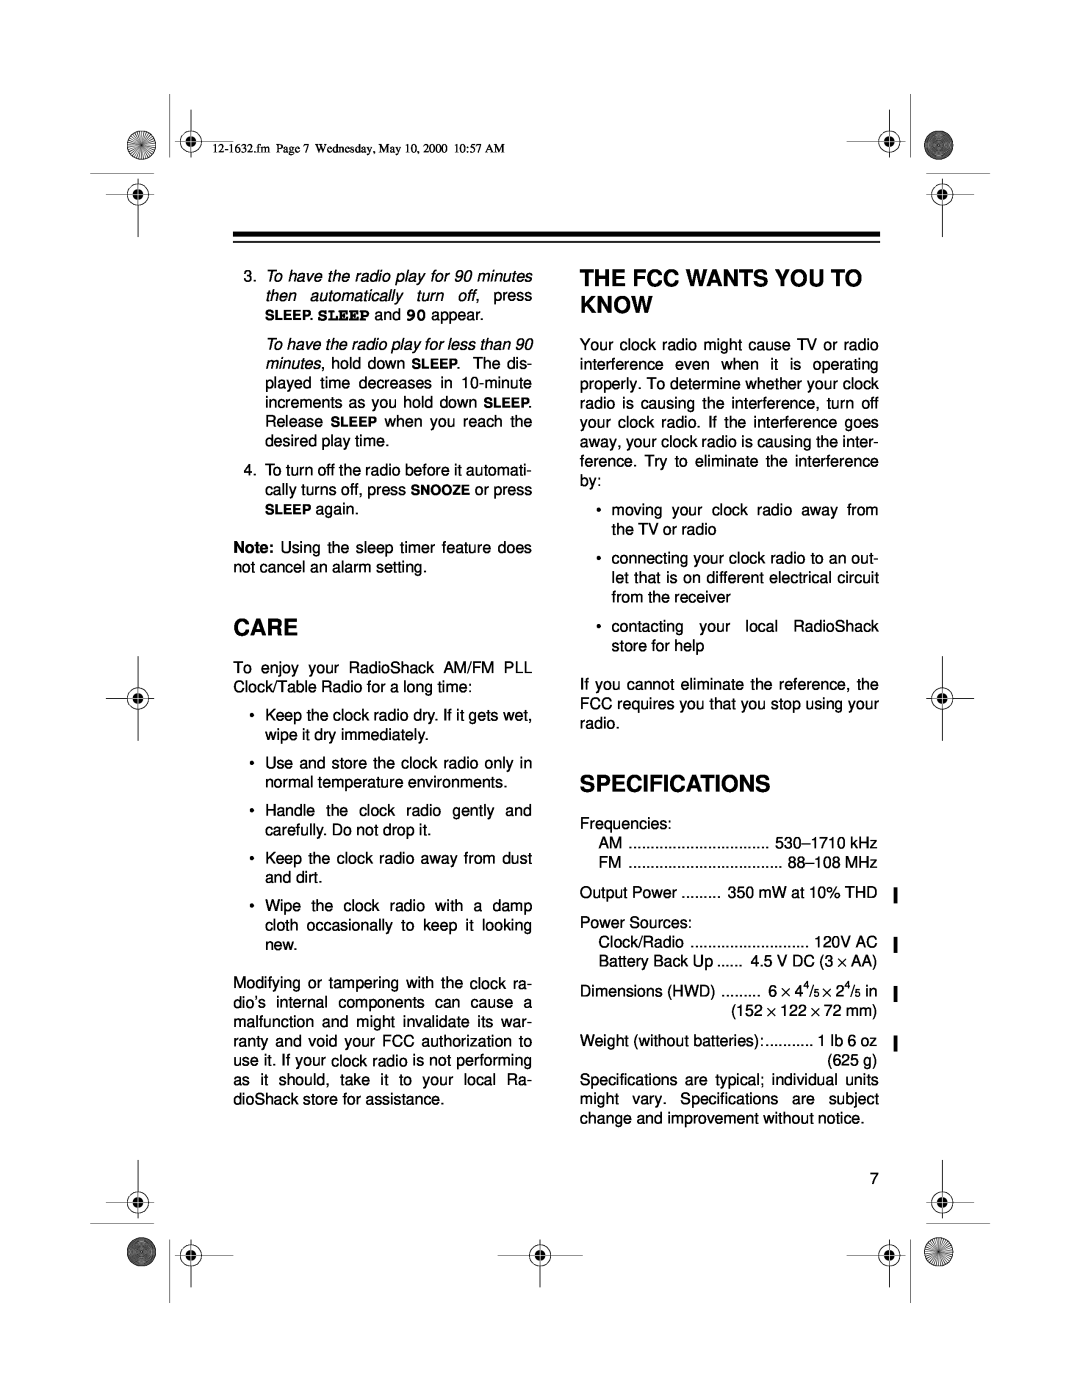 Radio Shack 12-1632 owner manual Care, The Fcc Wants You To Know, Specifications 